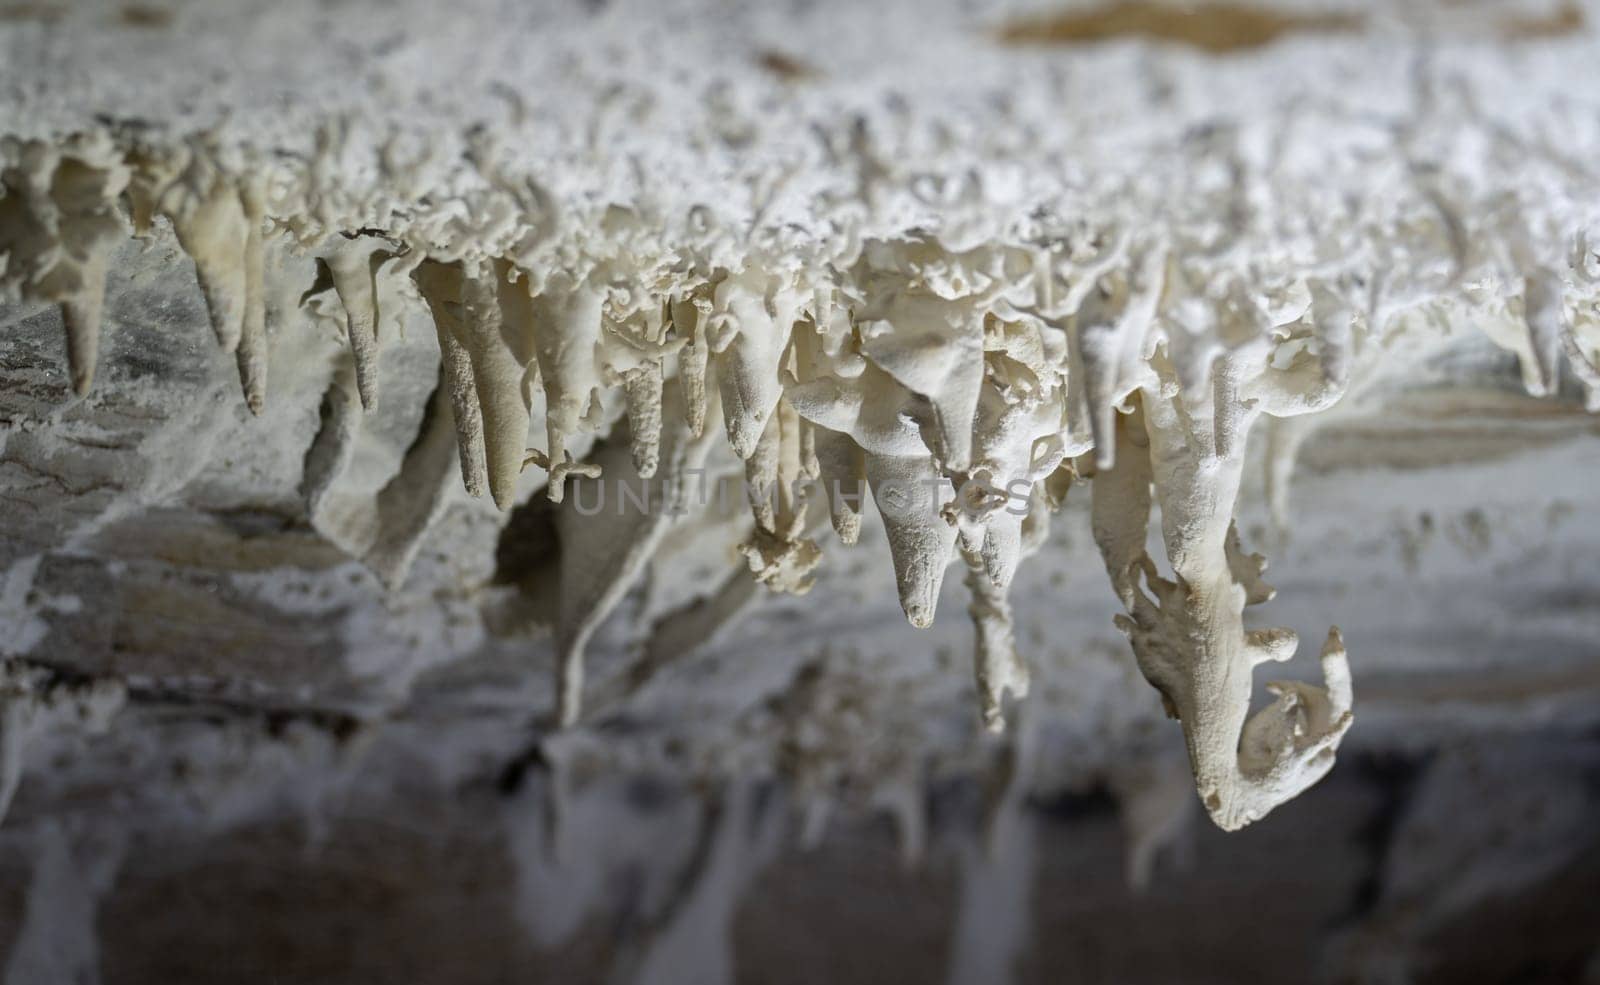 Intricate stalactites in a cave showcase stunning geological formations.